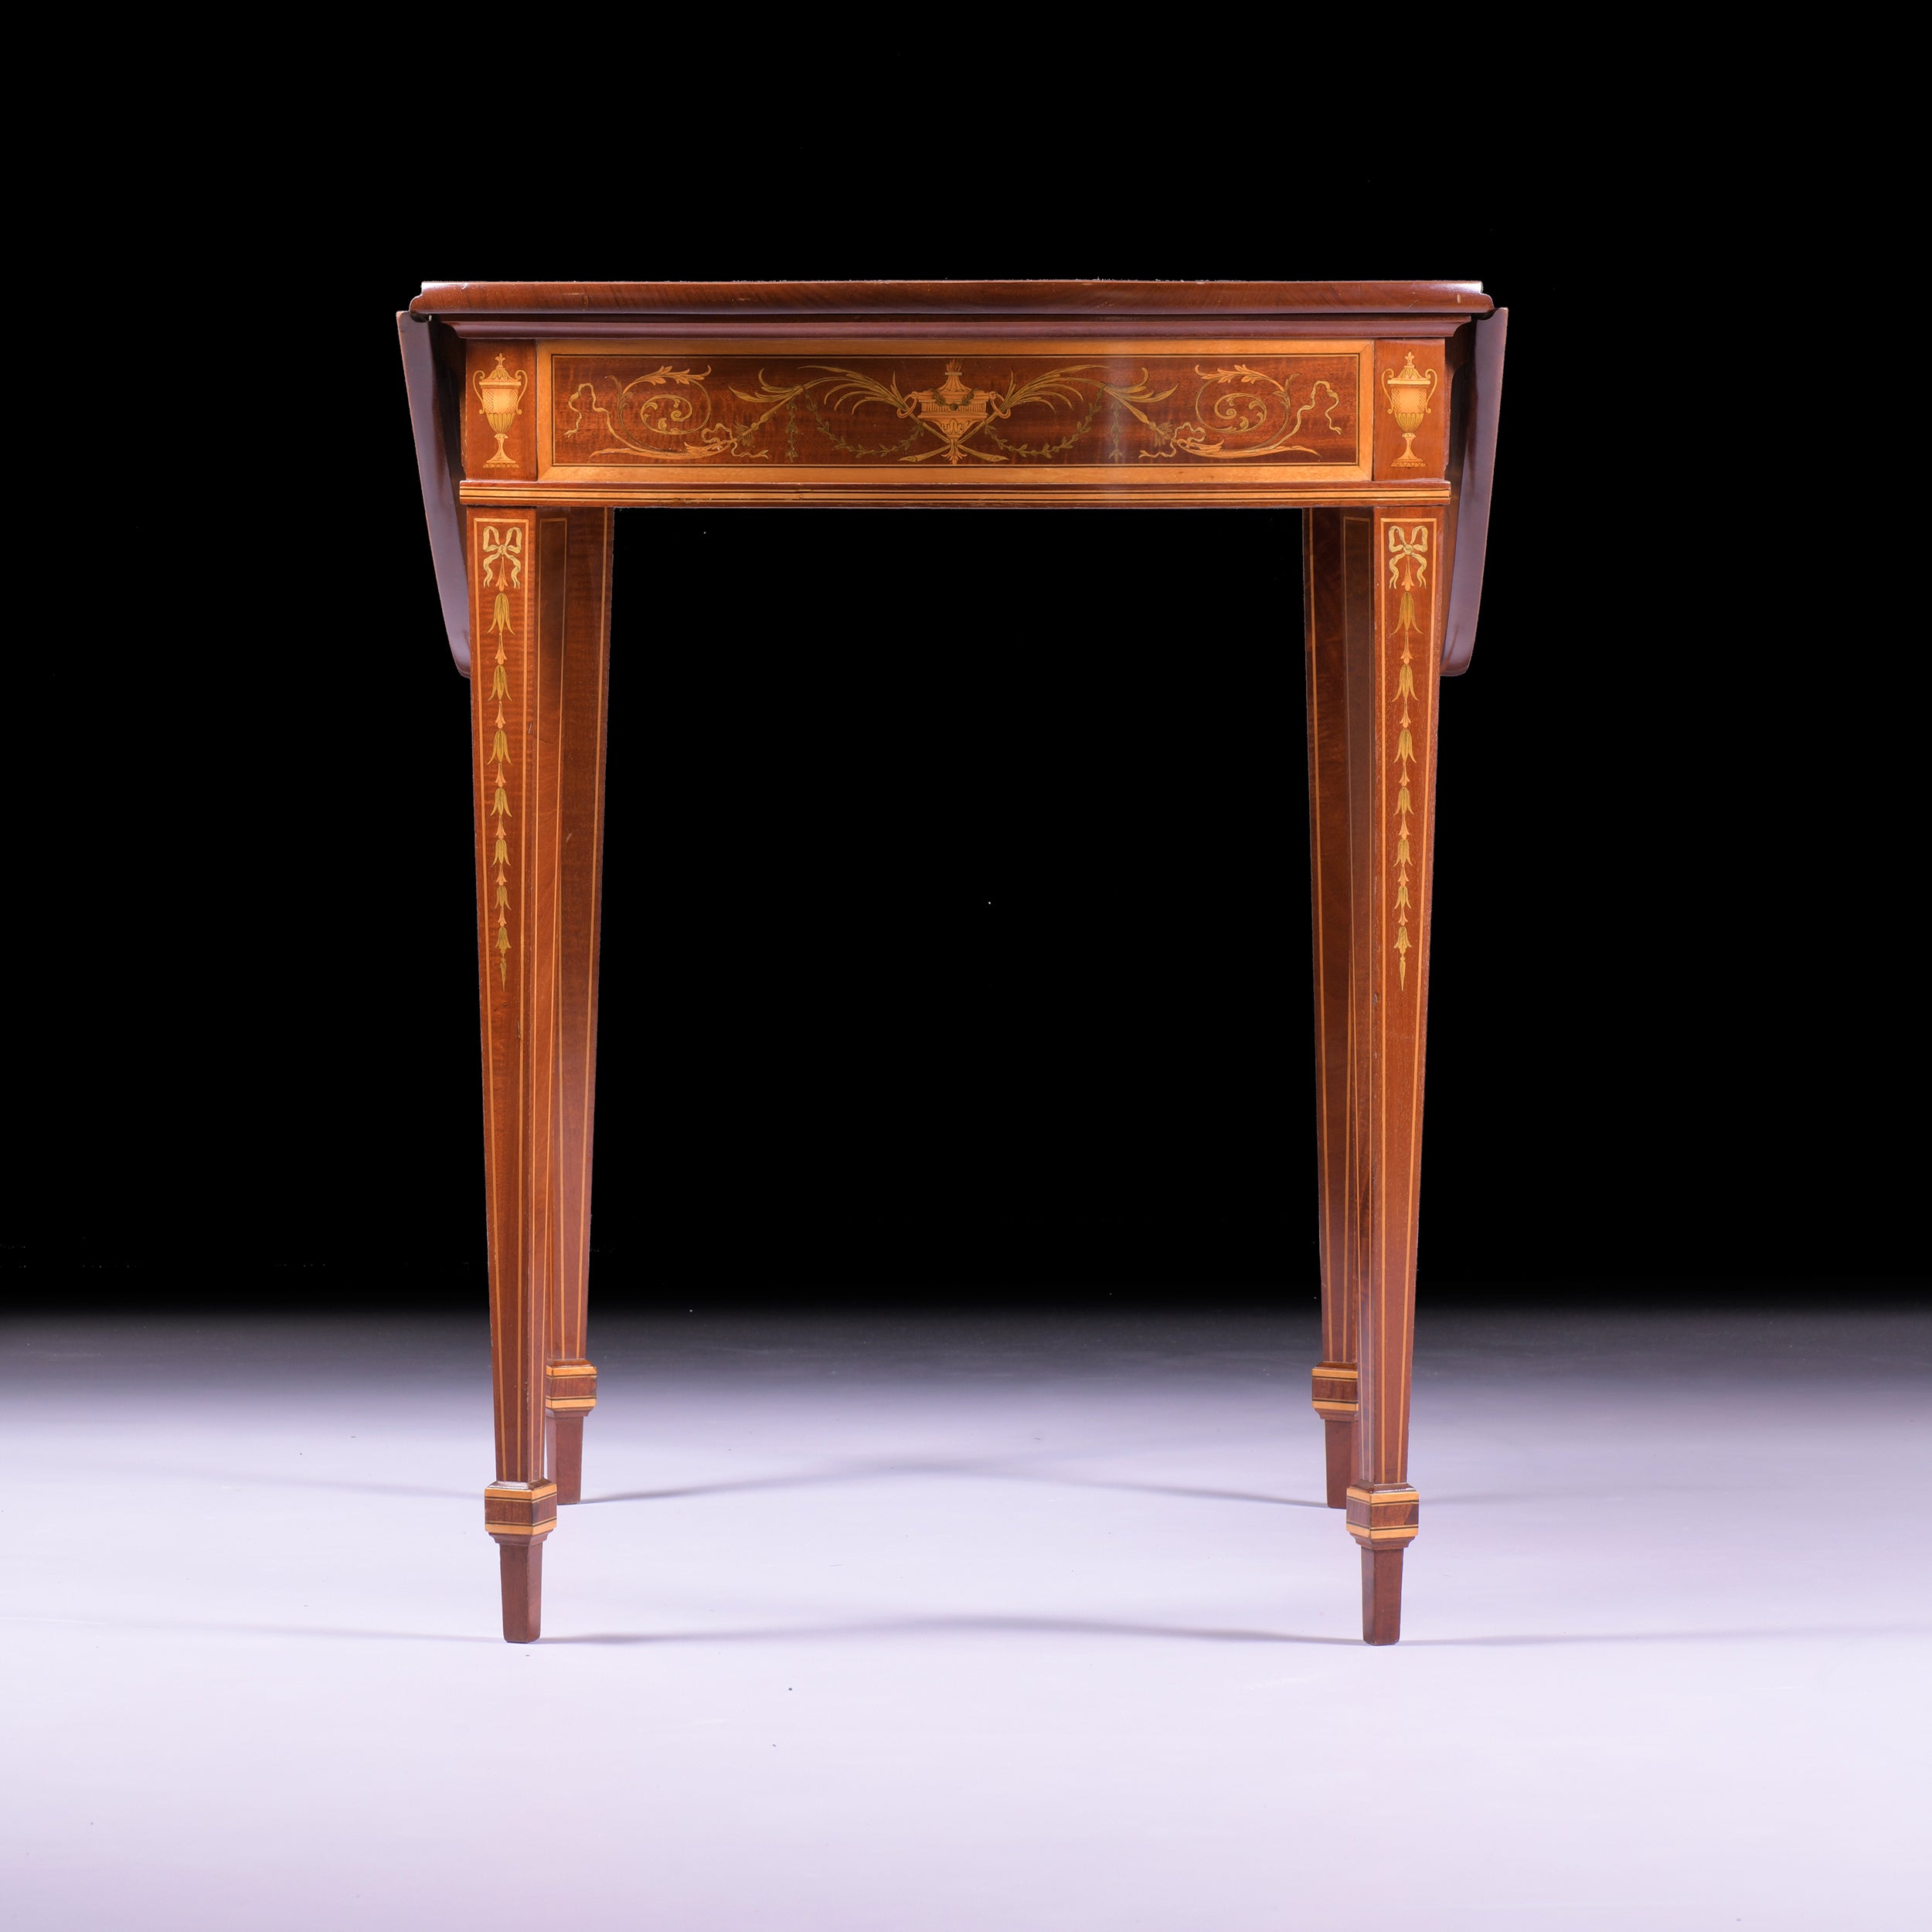 PEMBROKE TABLE BY EDWARDS & ROBERTS - REF No. 9064